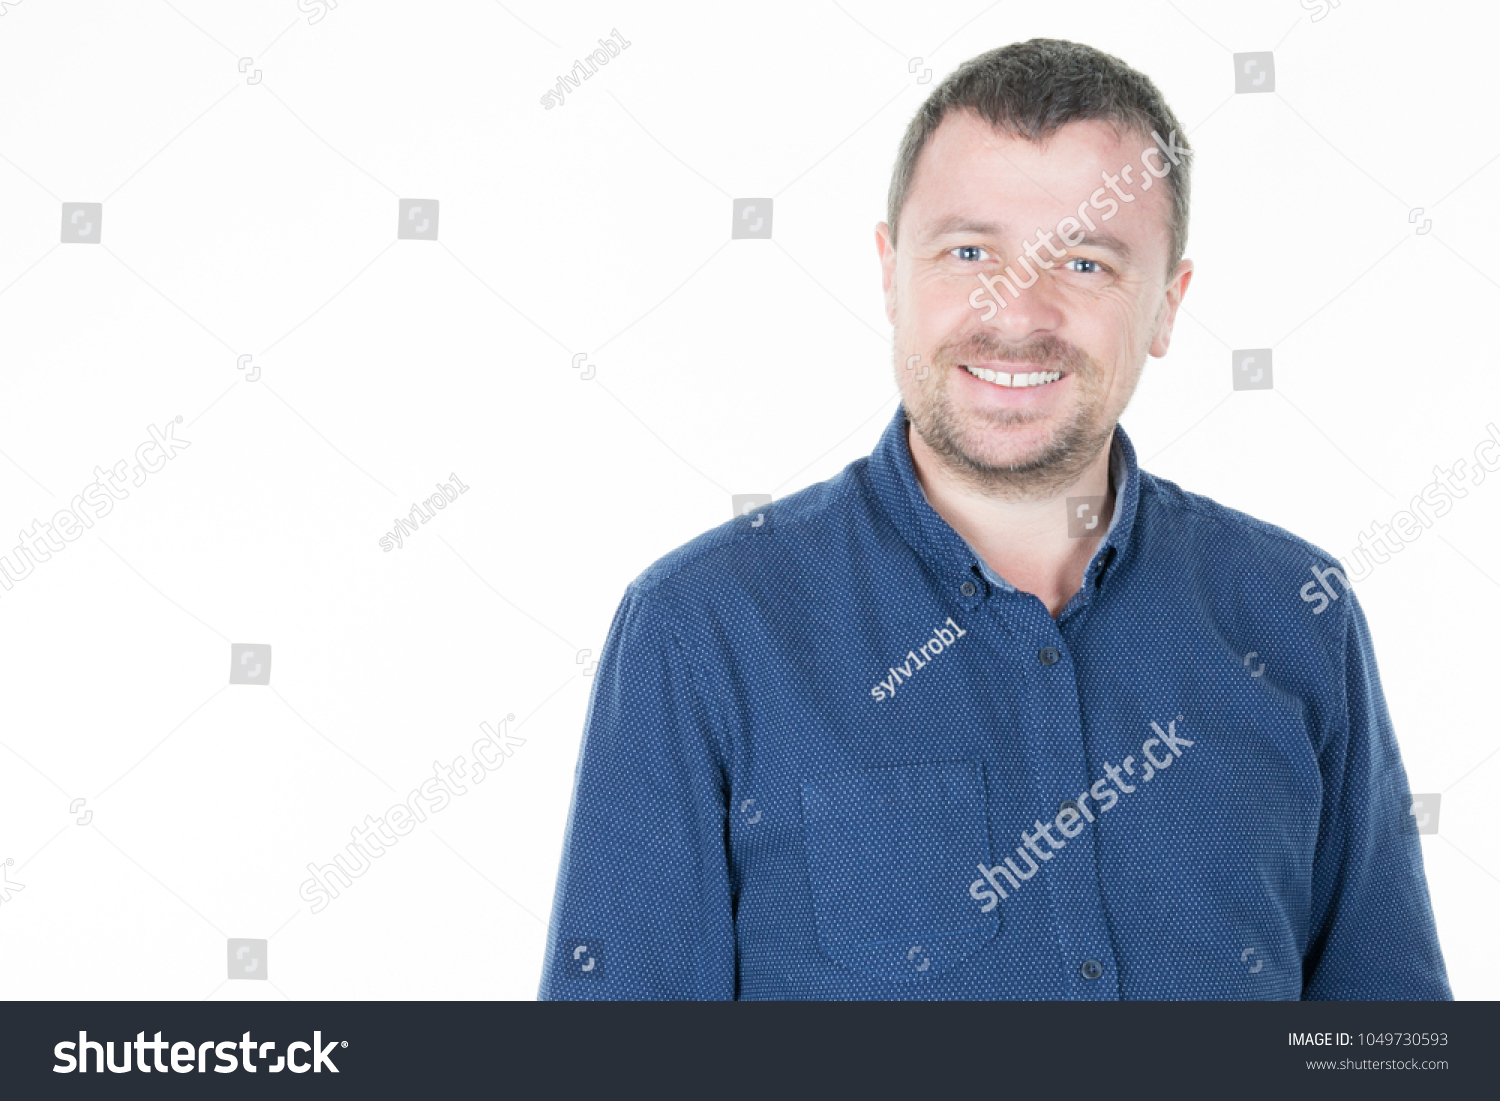 Portrait of smiling man with hands in pockets, isolated on white background #1049730593